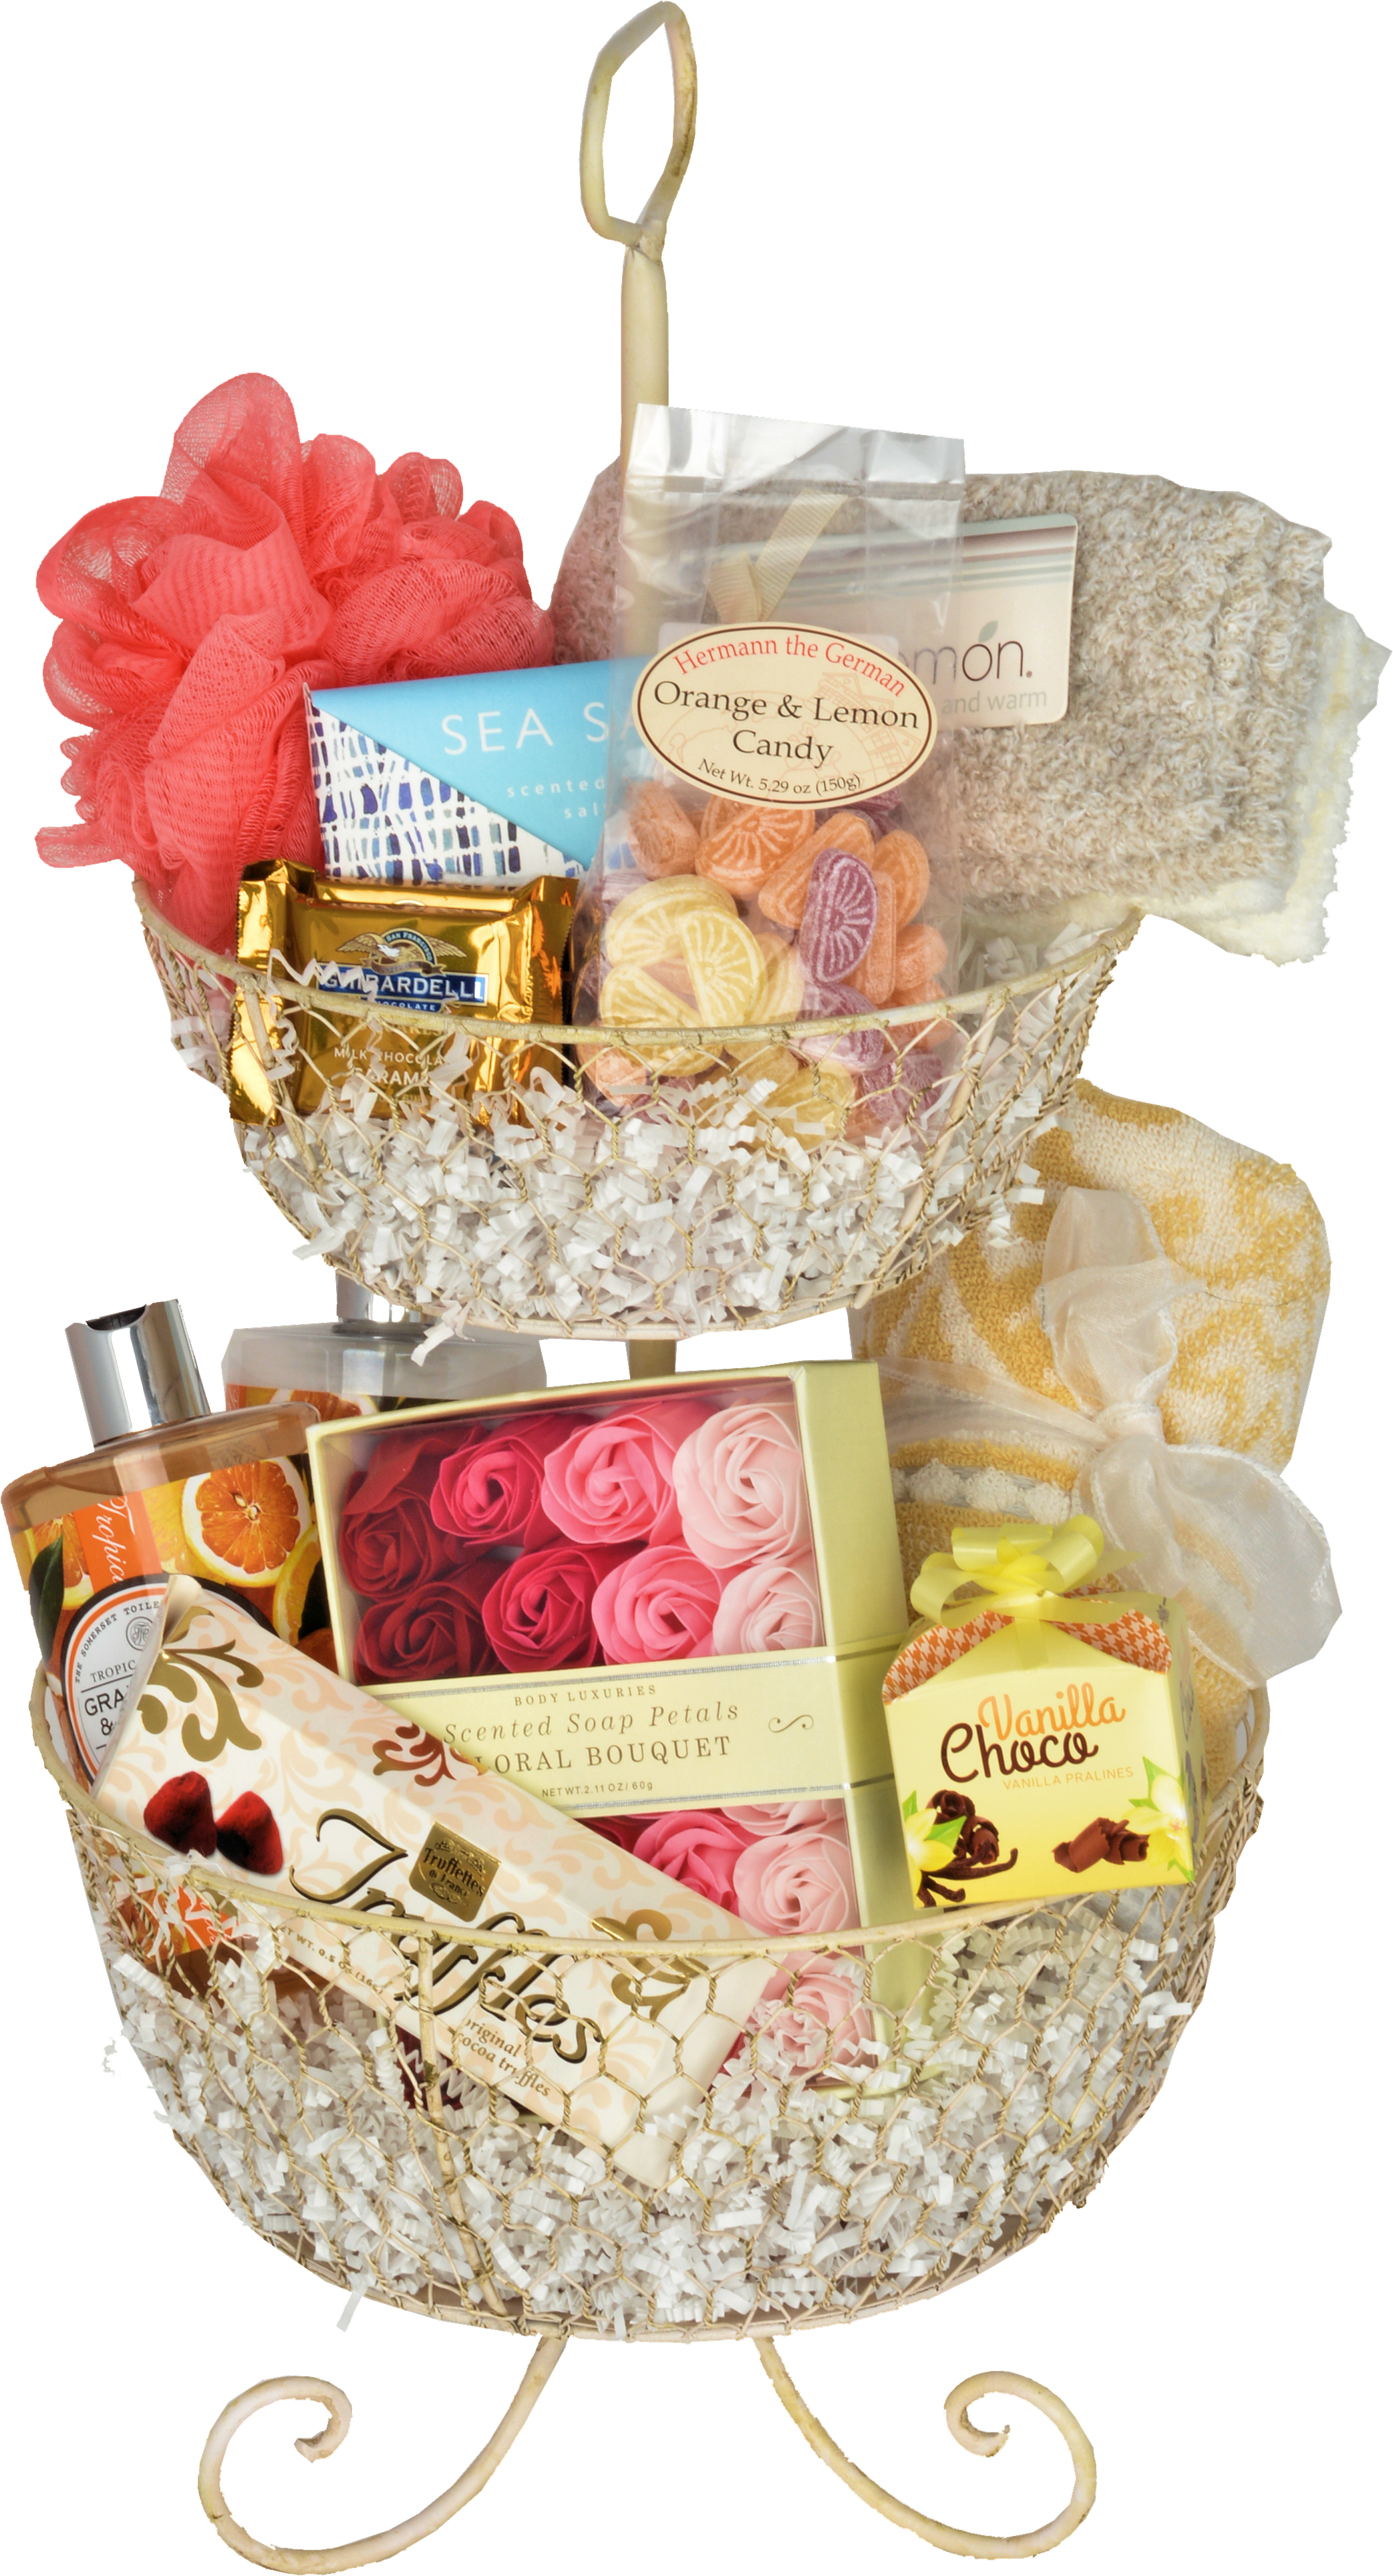 THE JUST BECAUSE FOR HER "CUSTOM MADE" - KS Gift Baskets